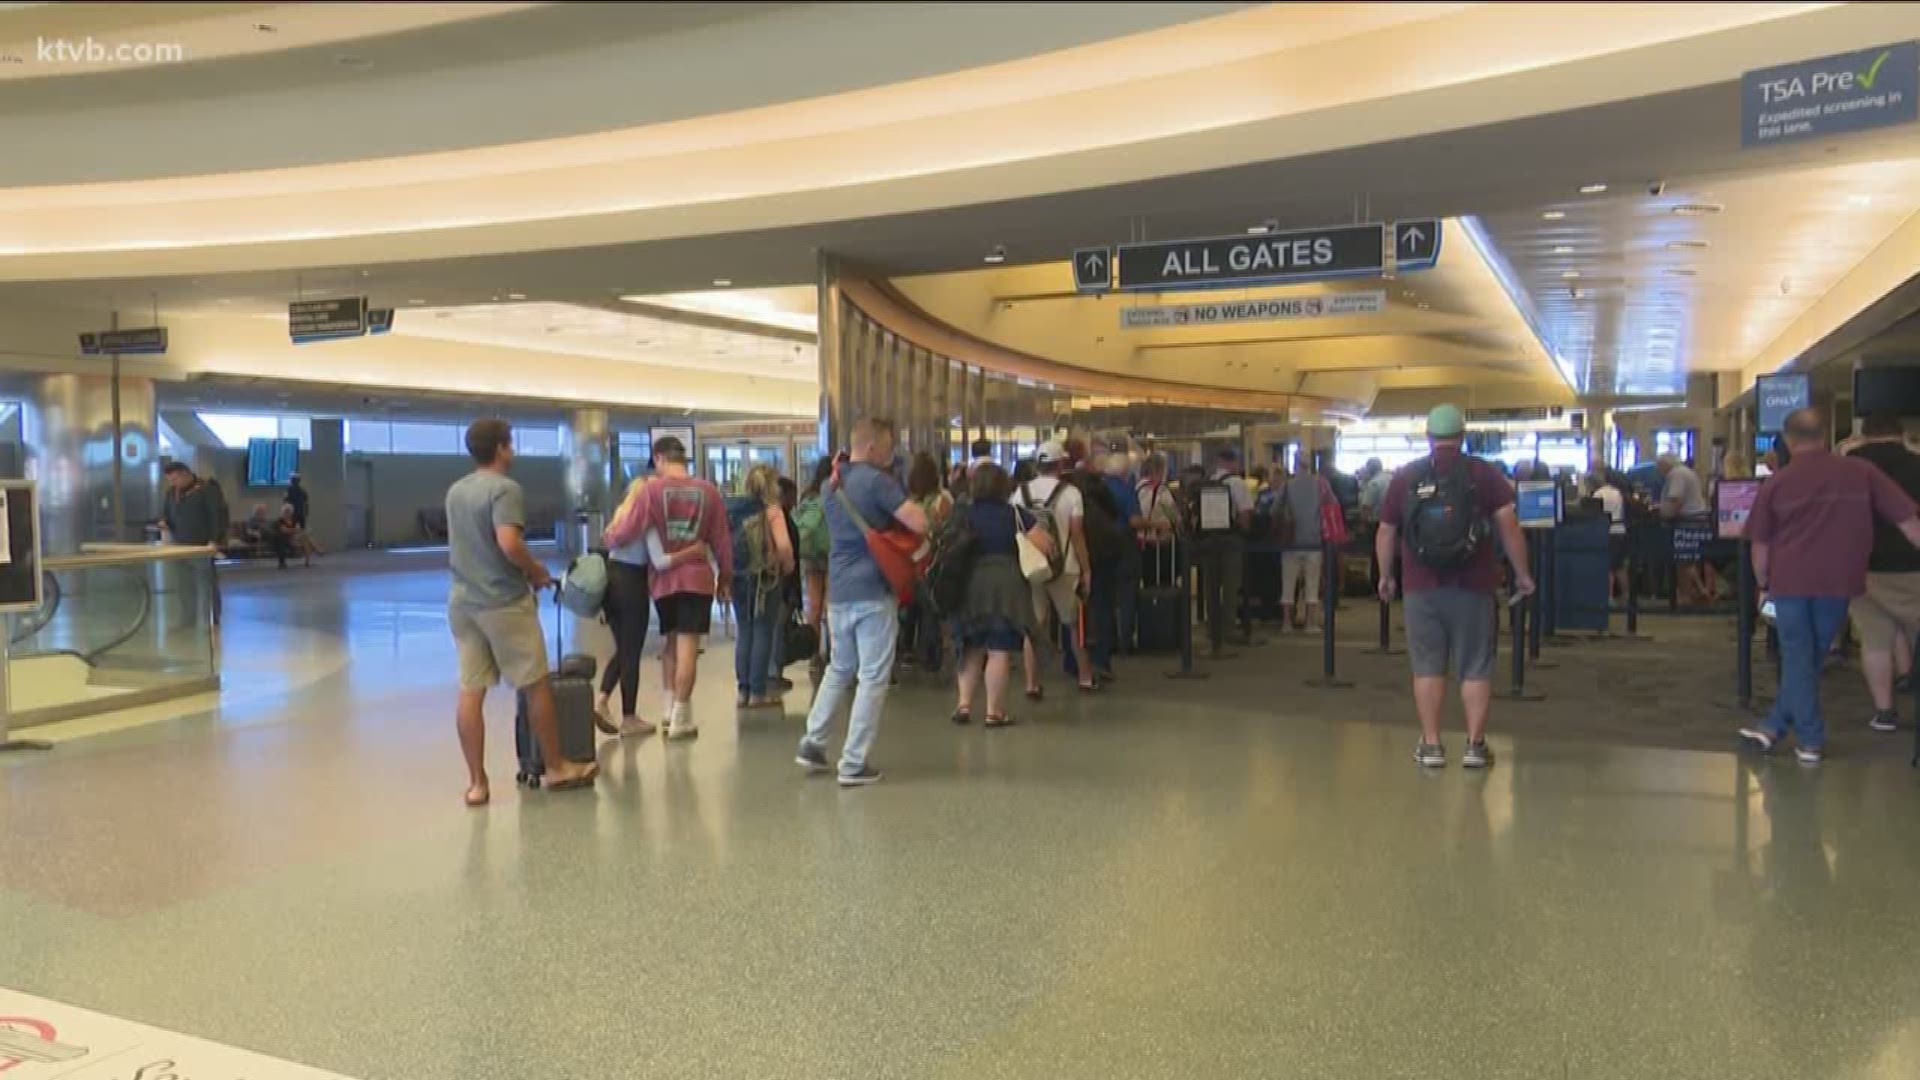 It is part of an effort to speed up the process at the airport's security checkpoint.